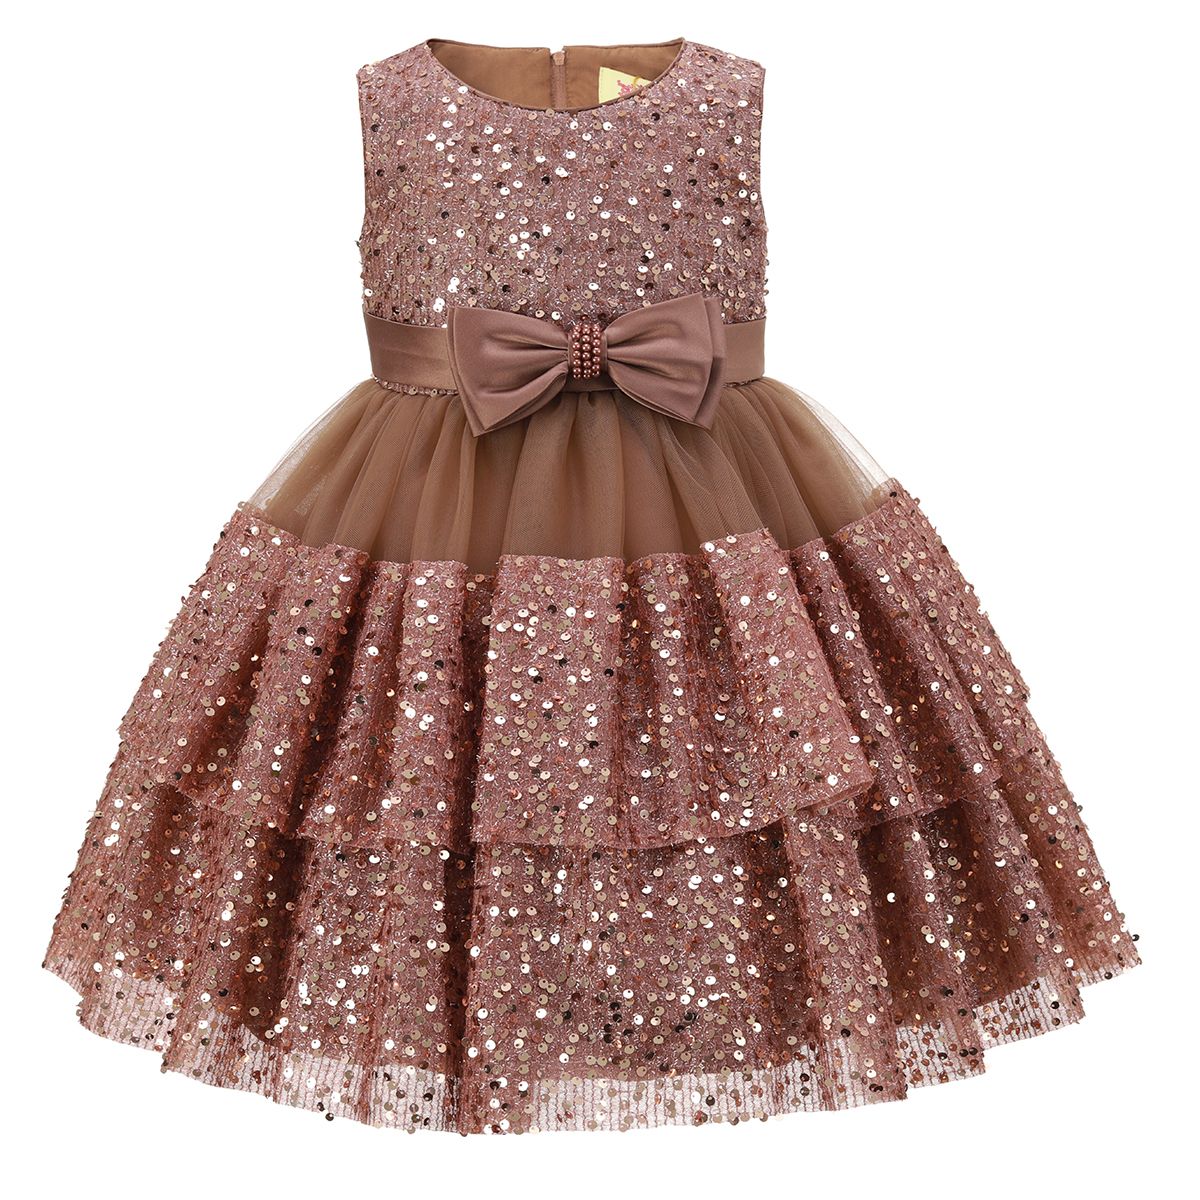 Brown Layered Sequin Overlay Bow Dress